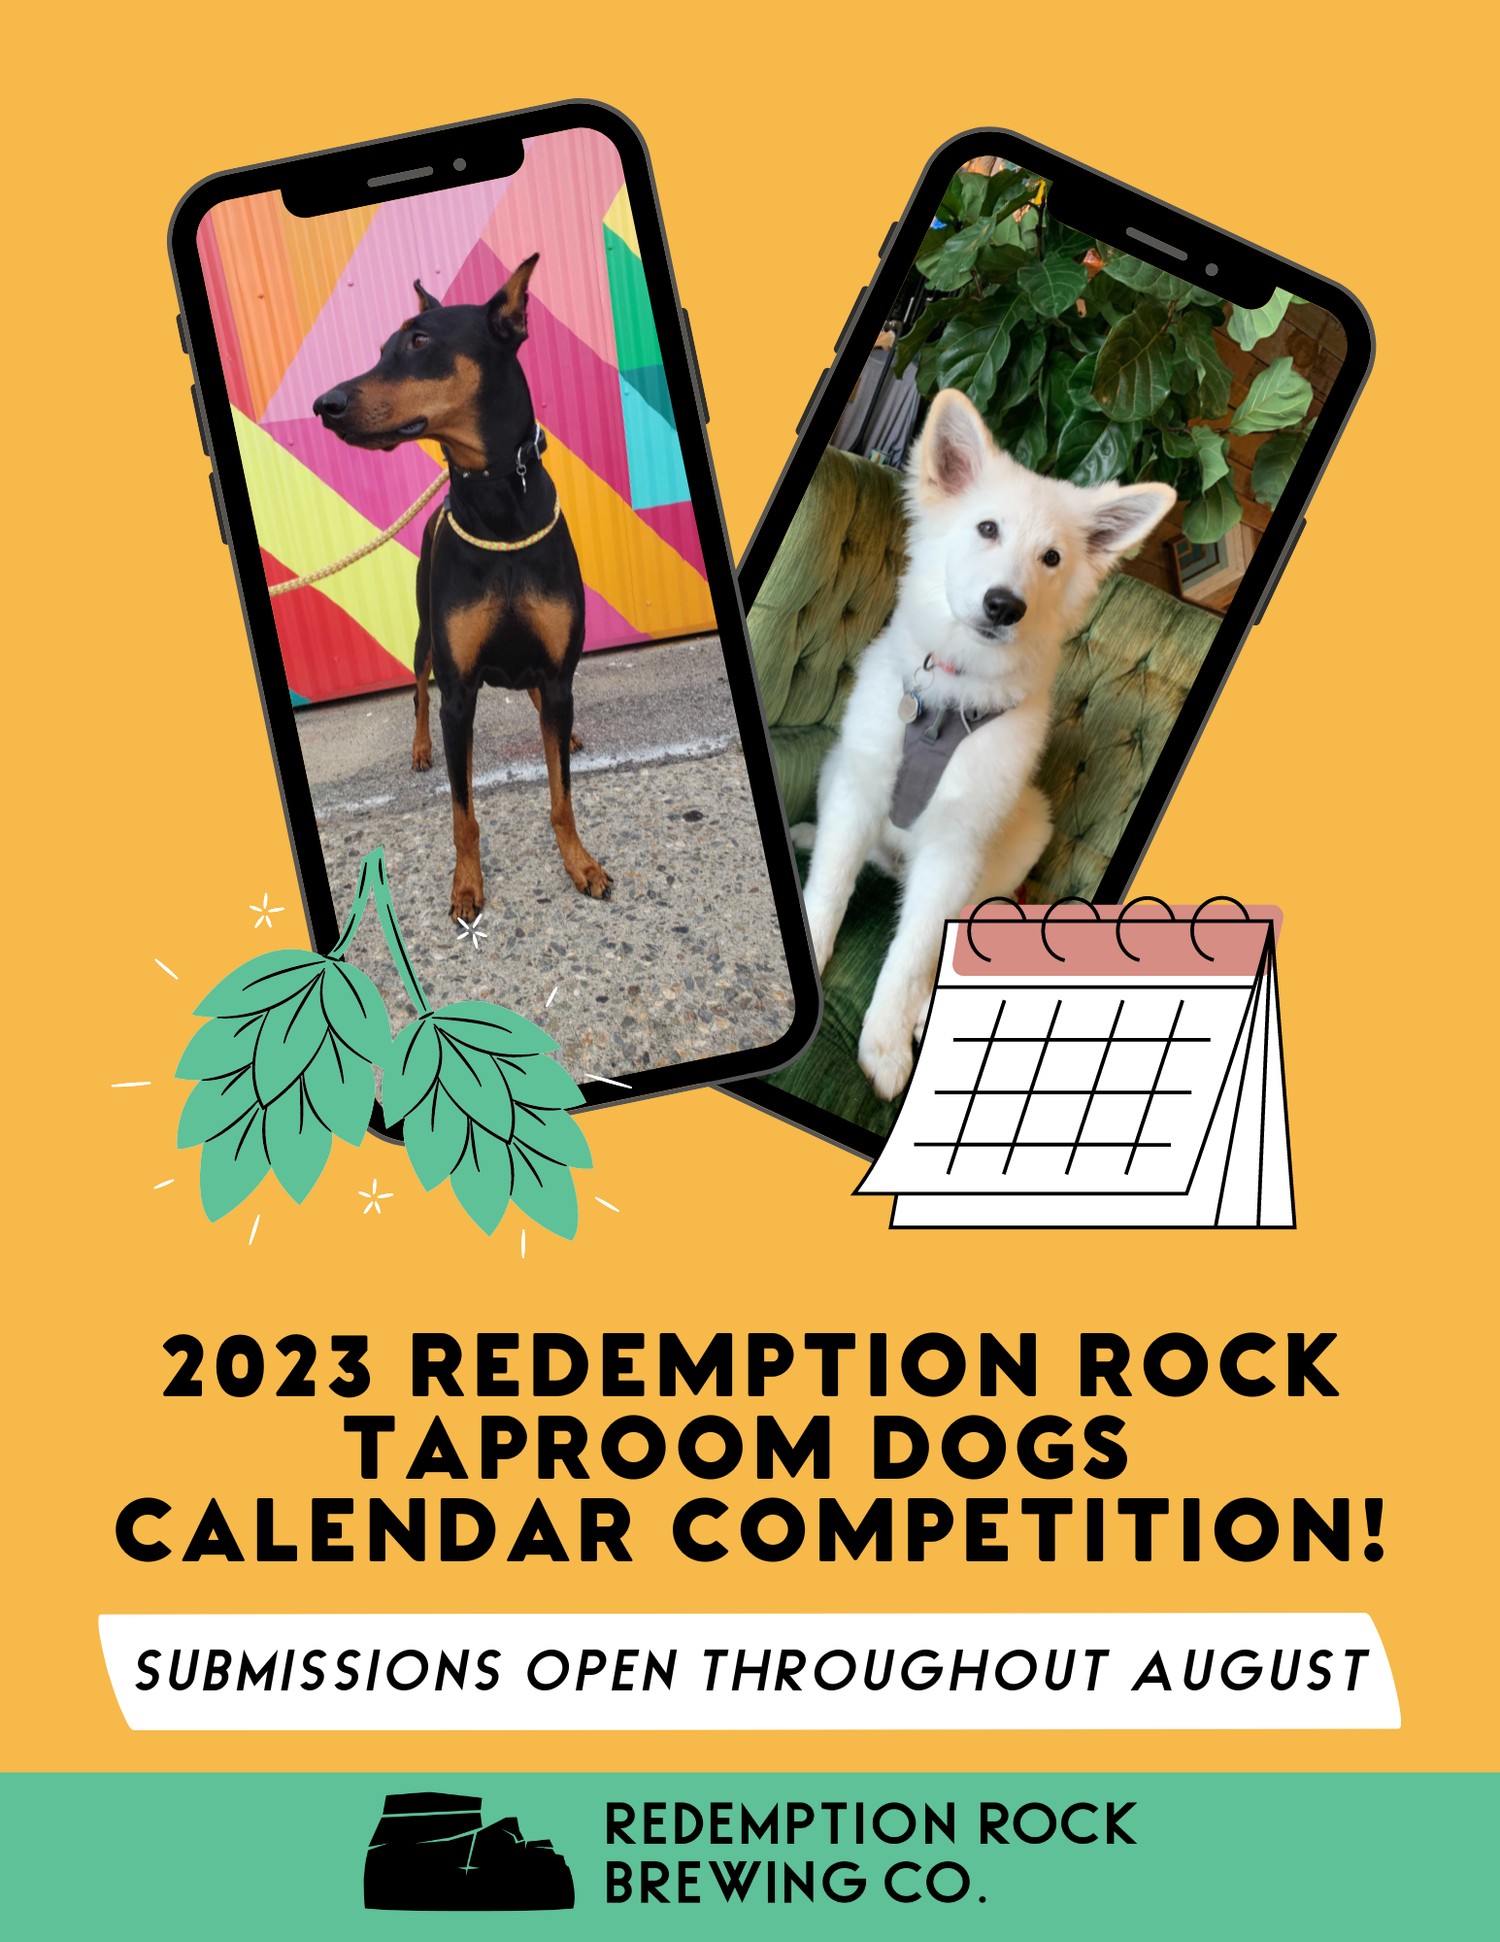 The 2023 Redemption Rock Taproom Dogs Calendar Competition is Open